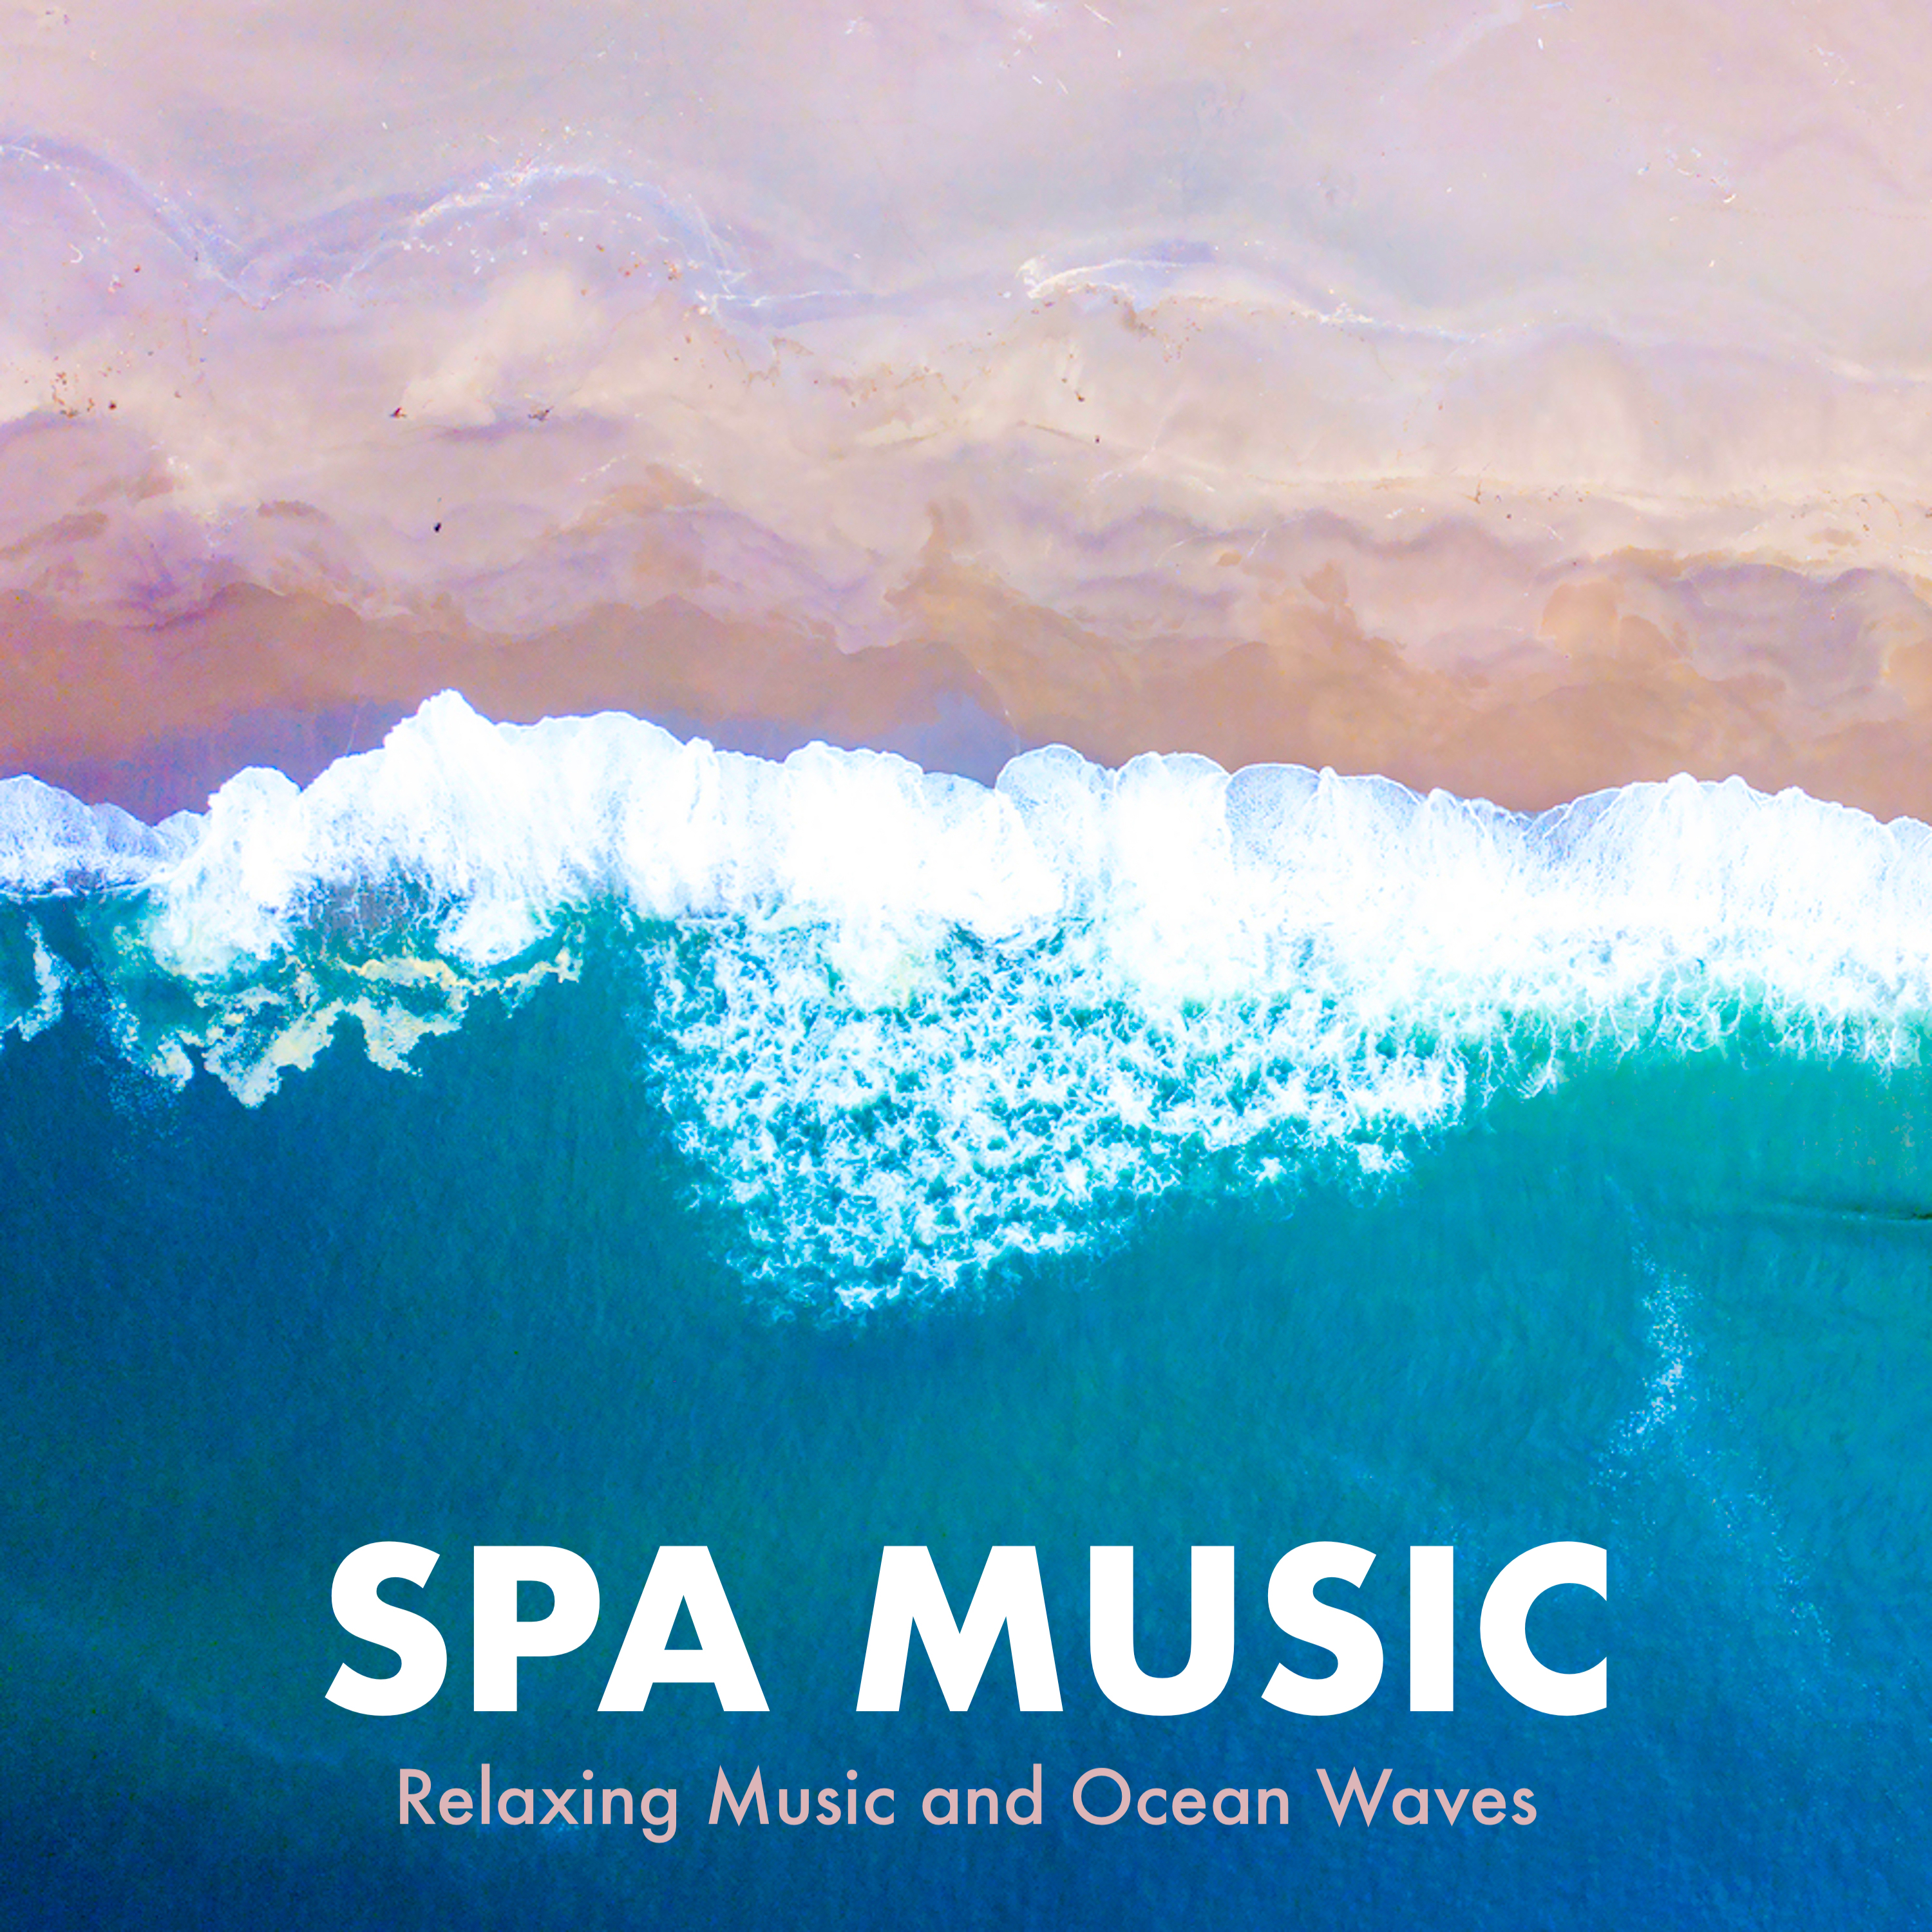 Ocean Waves For Spa Relaxation